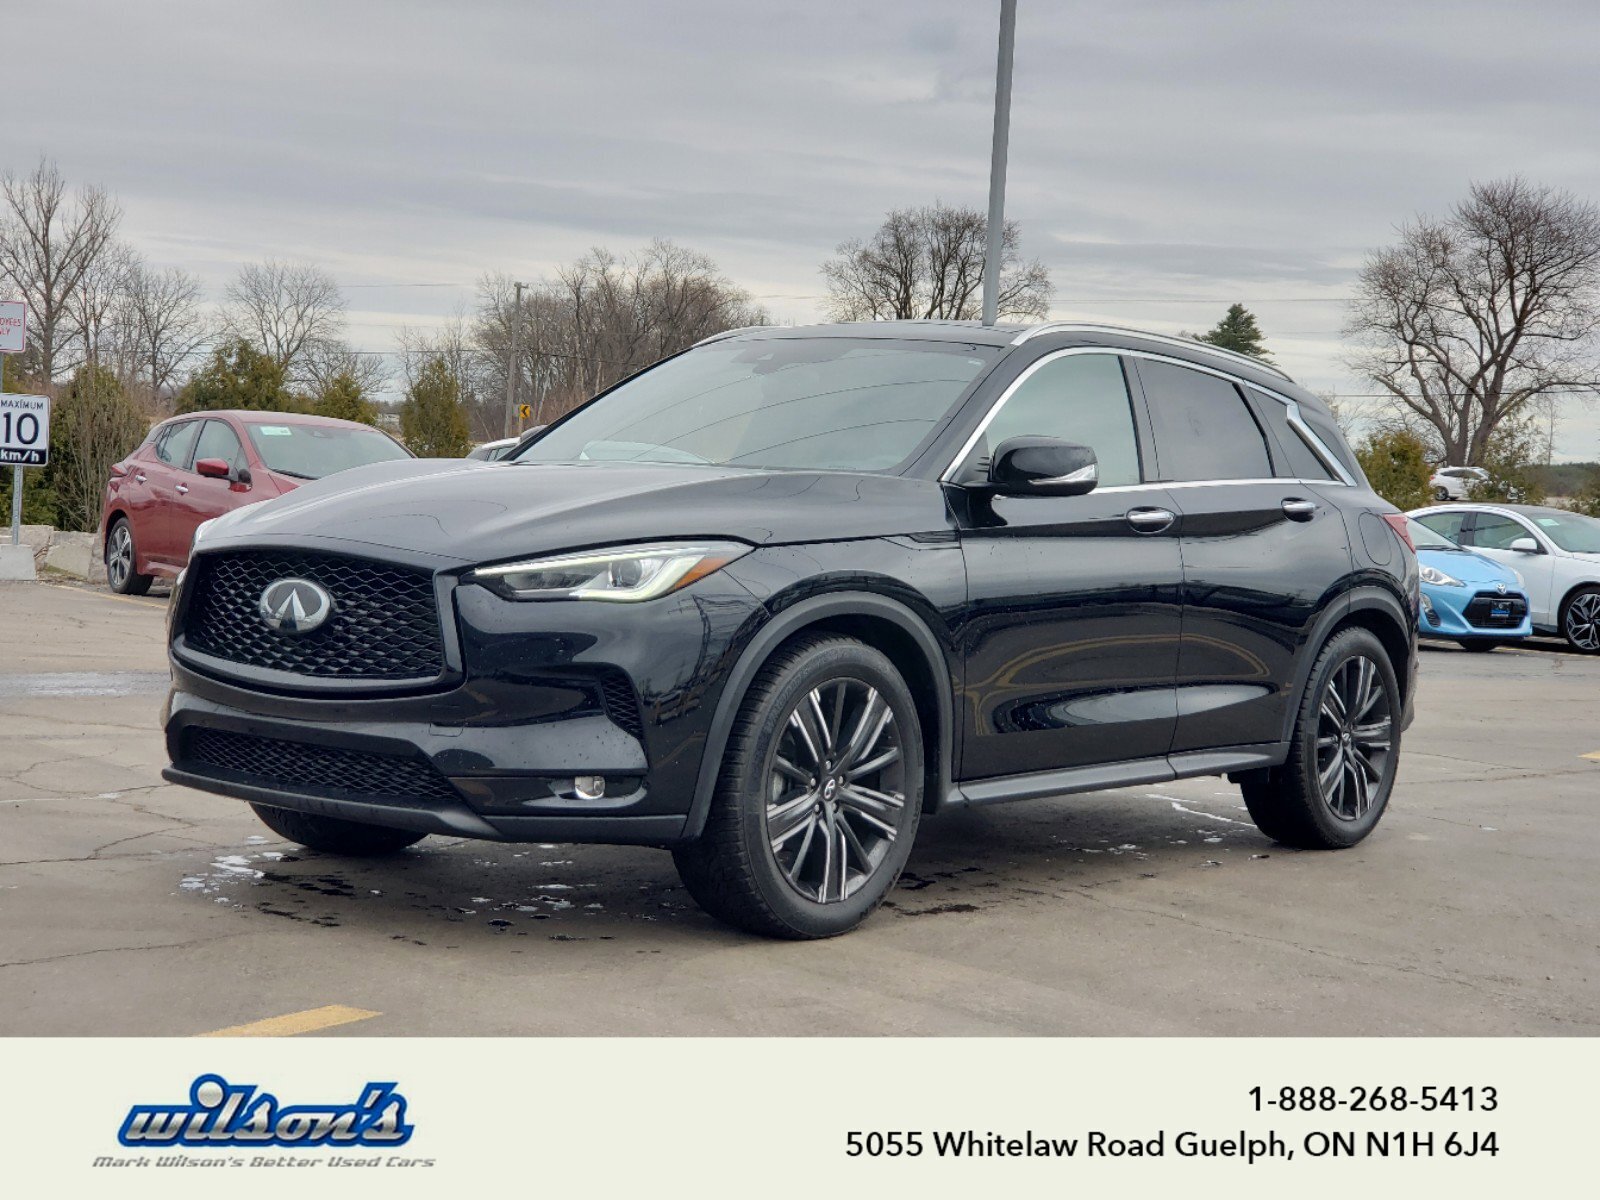 2022 Infiniti QX50 LUXE I-LINE AWD, Leather, Pano Roof, Heated Seats,